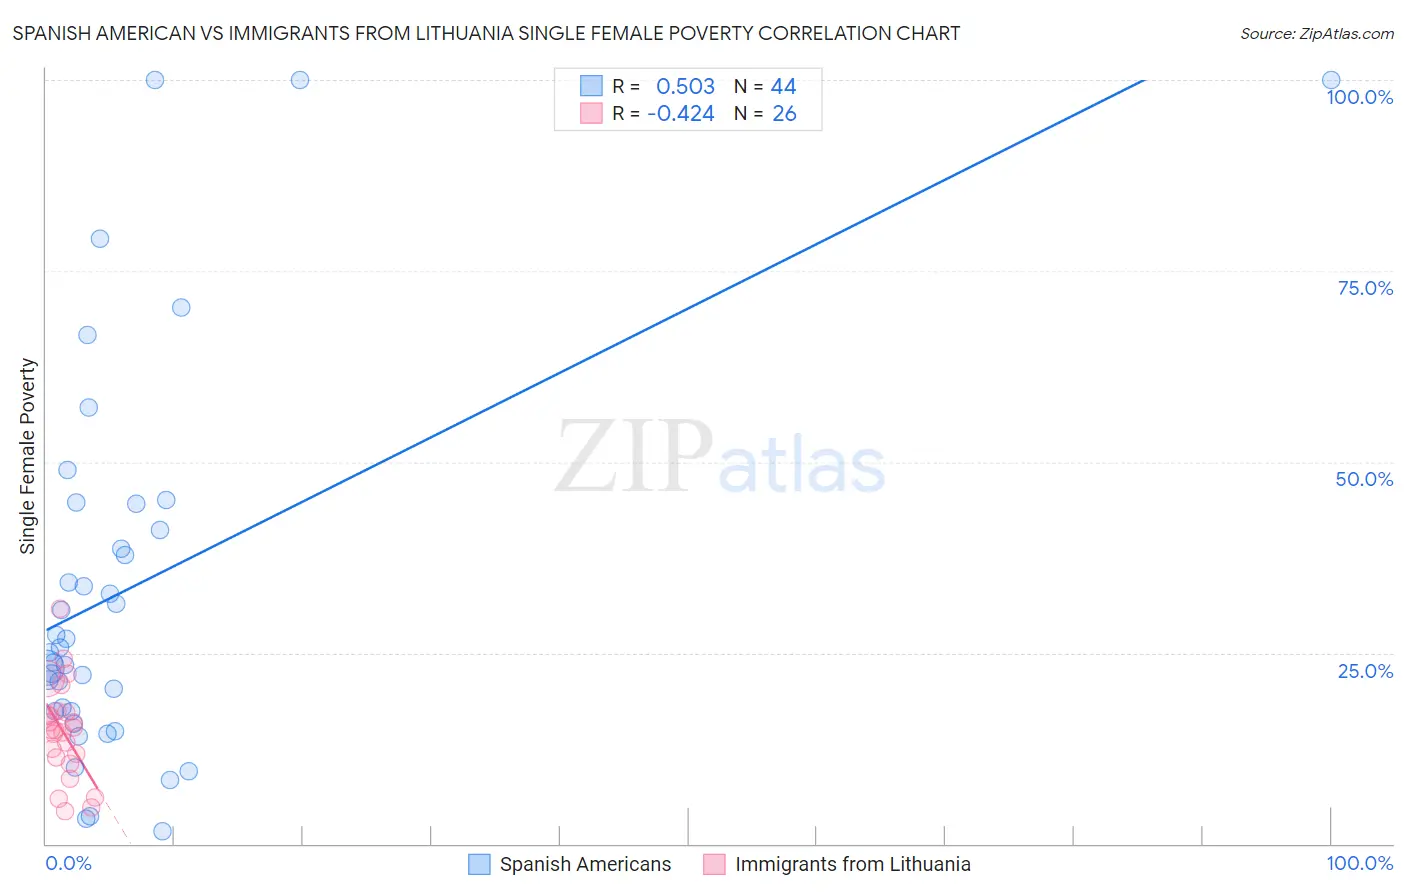 Spanish American vs Immigrants from Lithuania Single Female Poverty